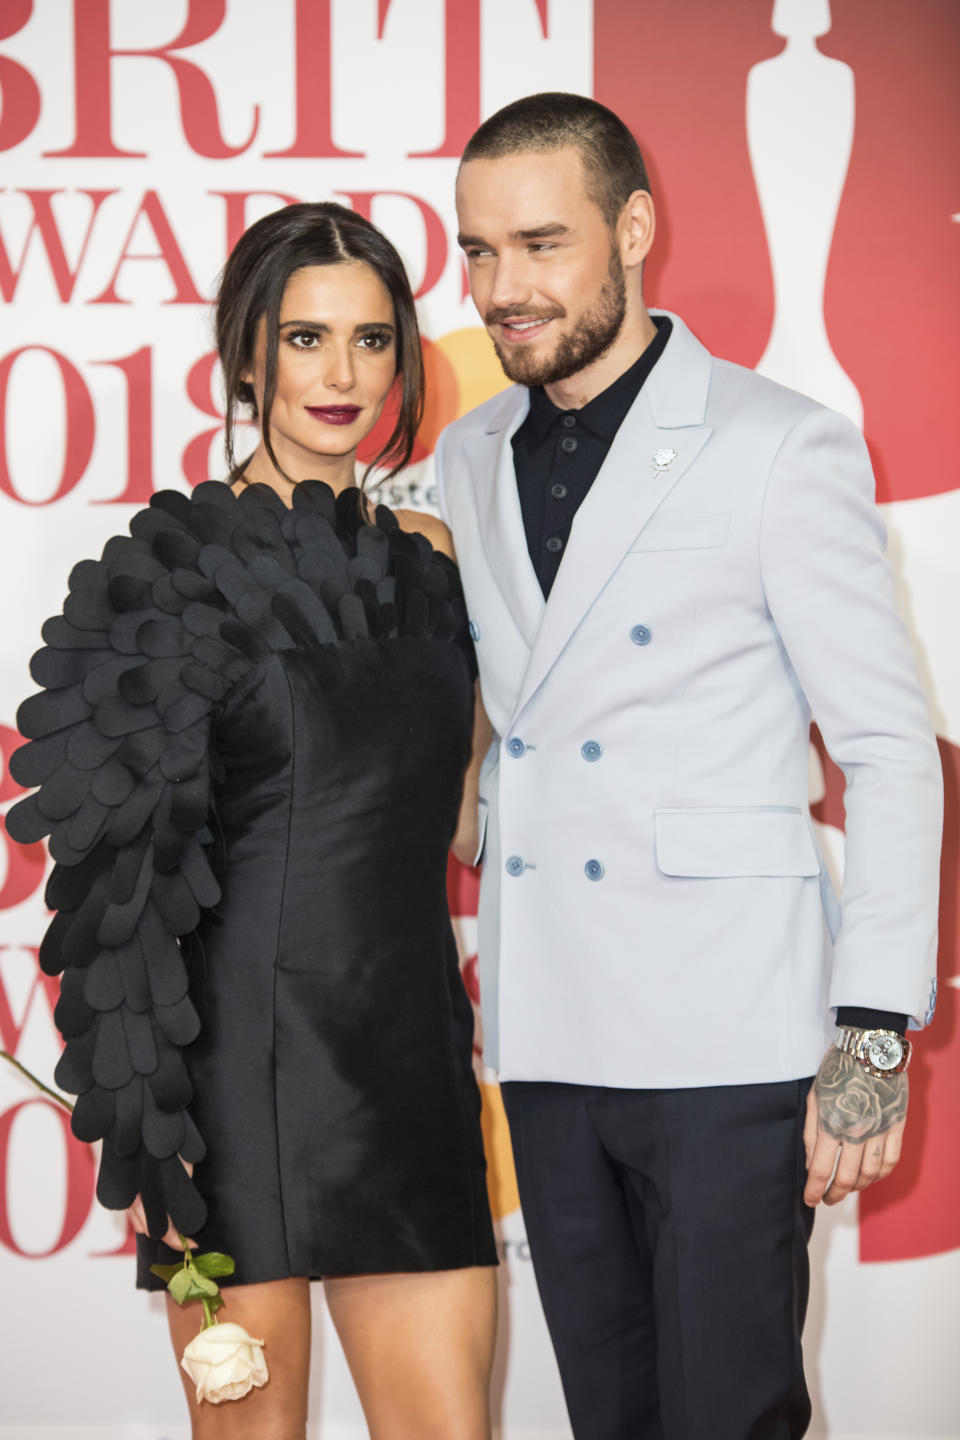 Singers Cheryl, left, and Liam Payne pose for photographers upon arrival at the Brit Awards 2018 in London, Wednesday, Feb. 21, 2018. (Photo by Vianney Le Caer/Invision/AP)